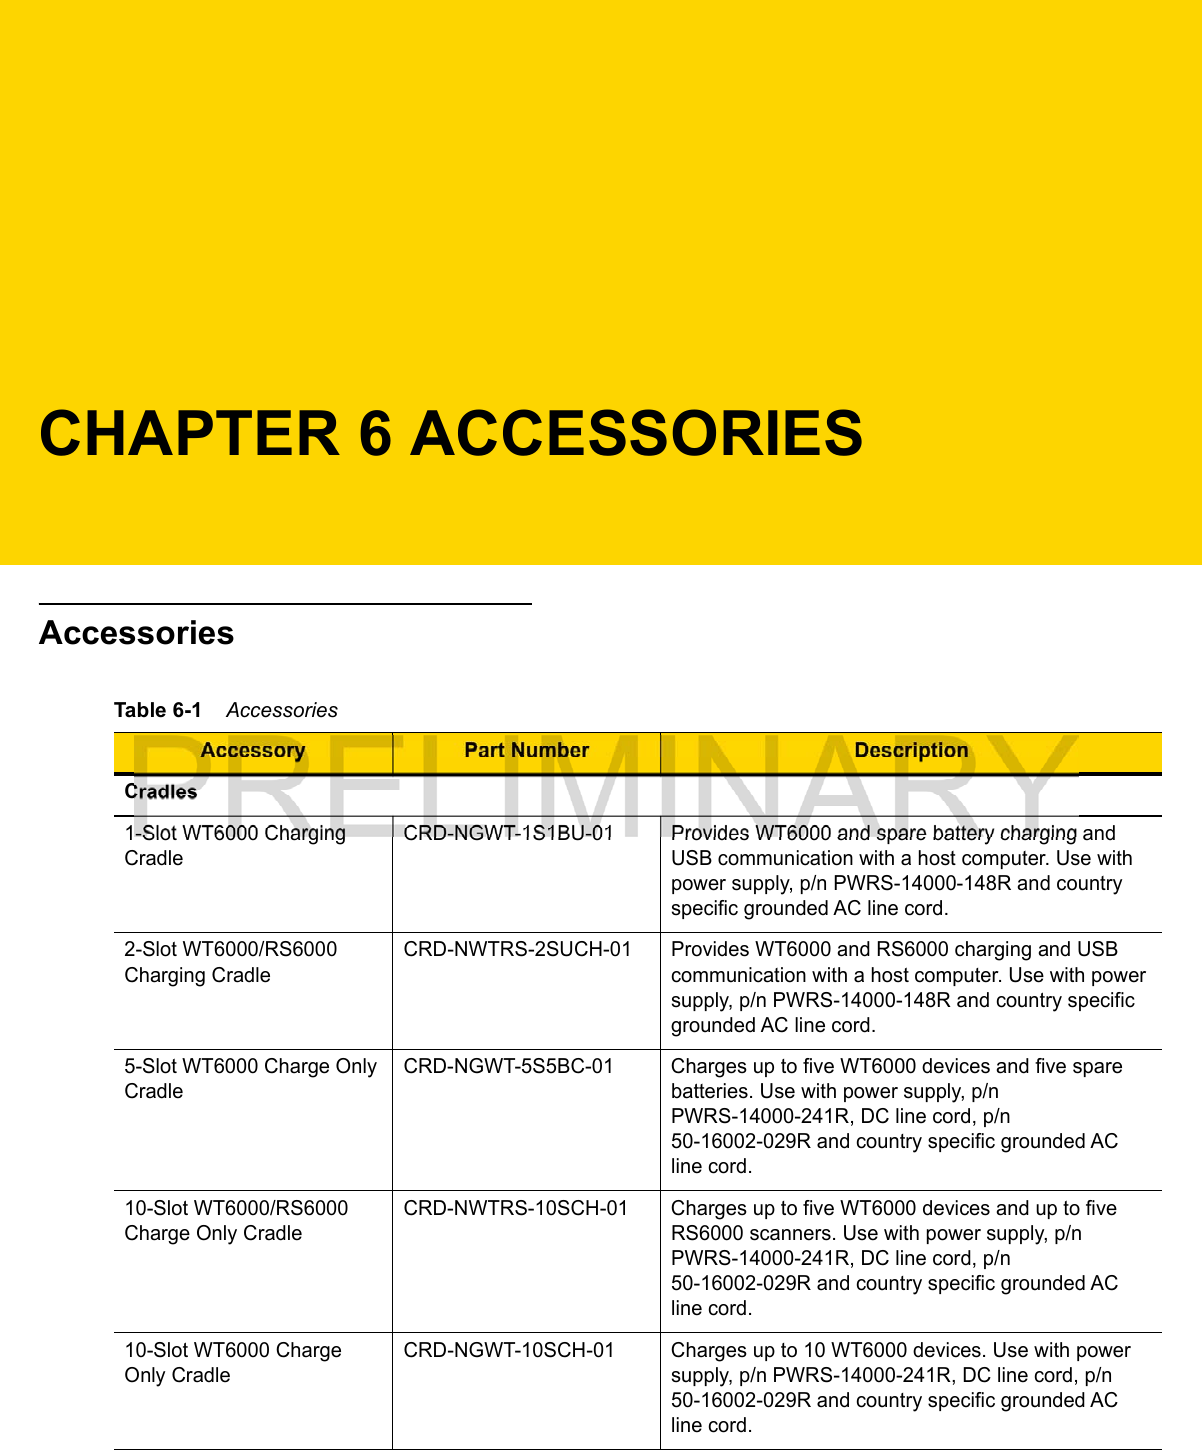 CHAPTER 6 ACCESSORIESAccessoriesTable 6-1    AccessoriesAccessory Part Number DescriptionCradles1-Slot WT6000 Charging CradleCRD-NGWT-1S1BU-01 Provides WT6000 and spare battery charging and USB communication with a host computer. Use with power supply, p/n PWRS-14000-148R and country specific grounded AC line cord.2-Slot WT6000/RS6000 Charging CradleCRD-NWTRS-2SUCH-01 Provides WT6000 and RS6000 charging and USB communication with a host computer. Use with power supply, p/n PWRS-14000-148R and country specific grounded AC line cord.5-Slot WT6000 Charge Only CradleCRD-NGWT-5S5BC-01 Charges up to five WT6000 devices and five spare batteries. Use with power supply, p/n PWRS-14000-241R, DC line cord, p/n 50-16002-029R and country specific grounded AC line cord.10-Slot WT6000/RS6000 Charge Only CradleCRD-NWTRS-10SCH-01 Charges up to five WT6000 devices and up to five RS6000 scanners. Use with power supply, p/n PWRS-14000-241R, DC line cord, p/n 50-16002-029R and country specific grounded AC line cord.10-Slot WT6000 Charge Only CradleCRD-NGWT-10SCH-01 Charges up to 10 WT6000 devices. Use with power supply, p/n PWRS-14000-241R, DC line cord, p/n 50-16002-029R and country specific grounded AC line cord.